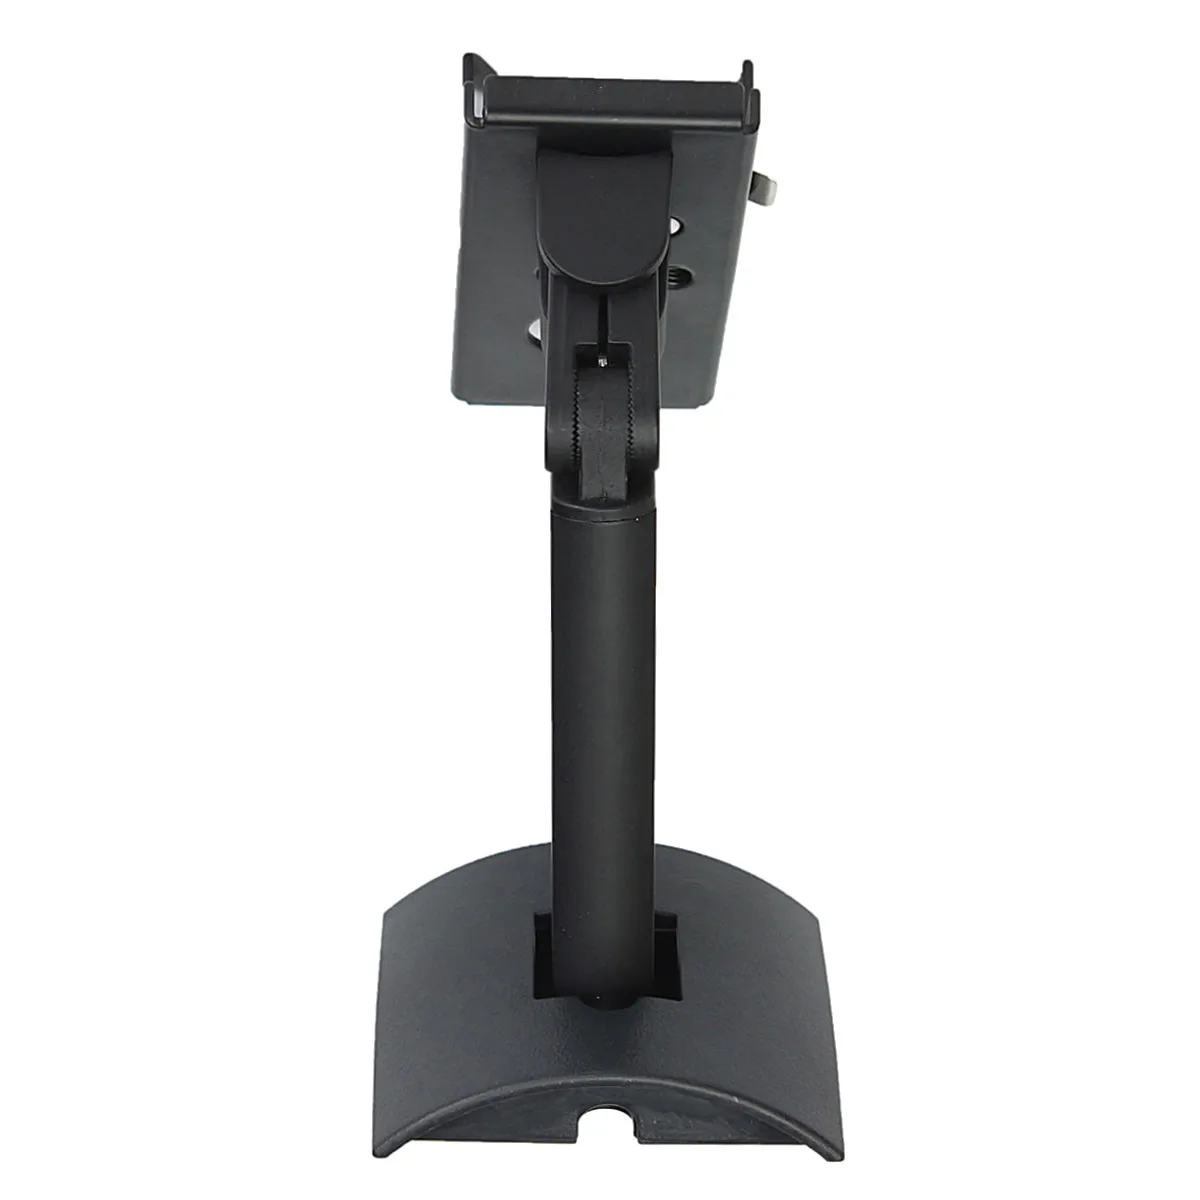 New Wall Mount Ceiling Bracket Holder For Bose All Lifestyle for Cinemate UB20 SERIES 2 II High Quality